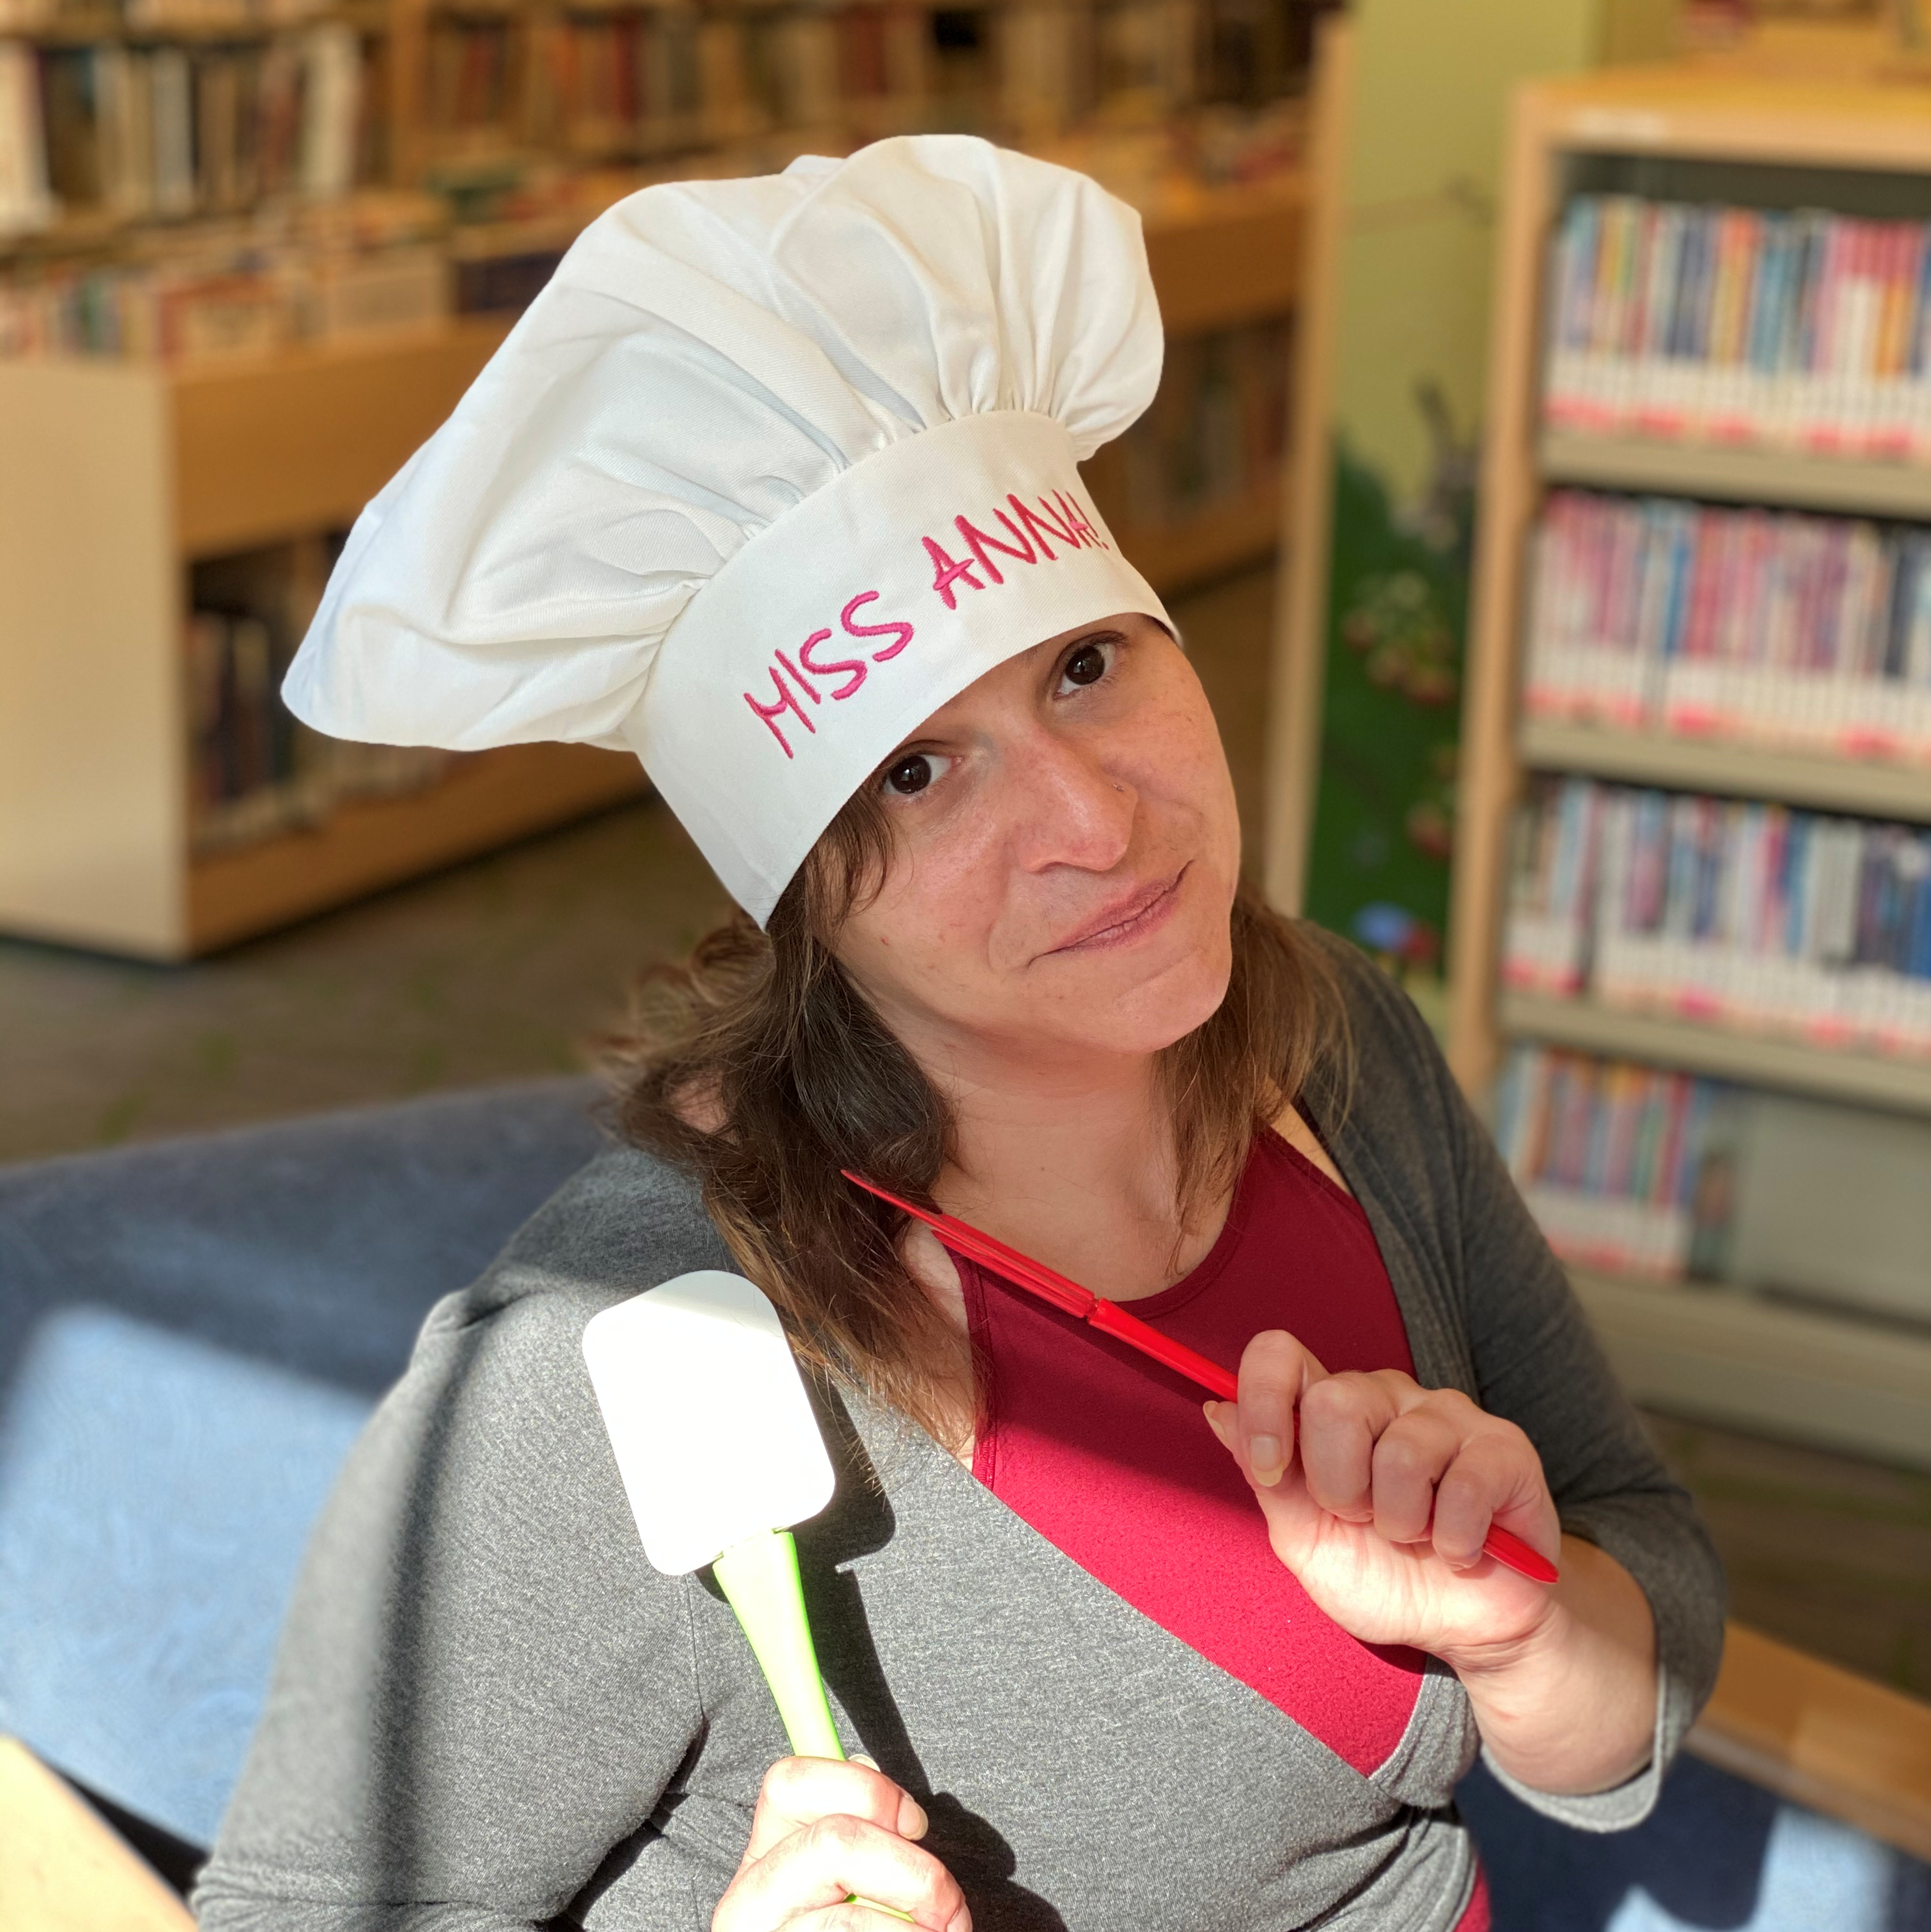 Miss Anna with a Chef's Hat on holding a spatula